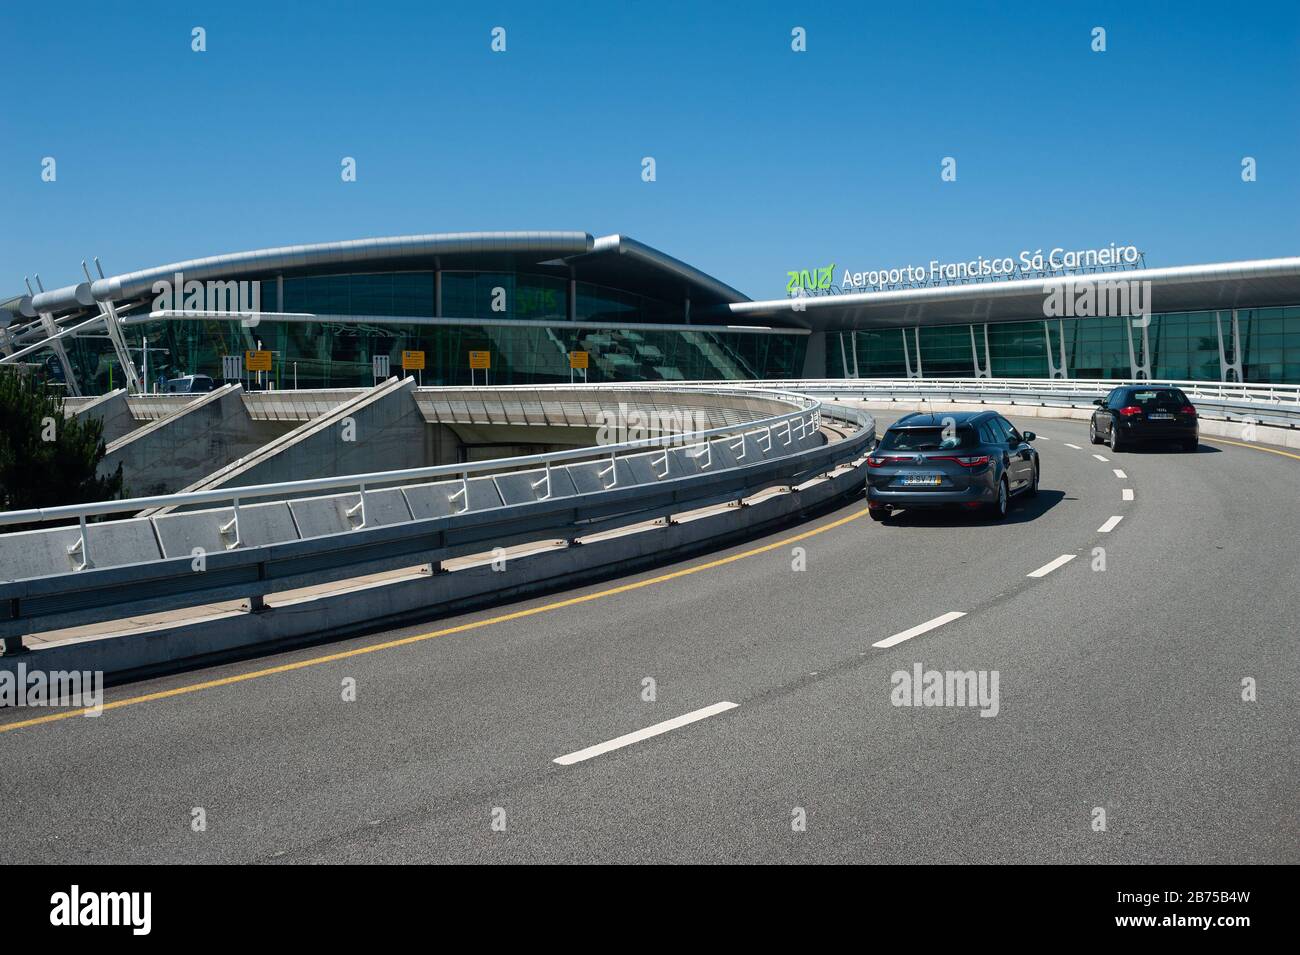 16.06.2018, Porto, Portugal, Europe - View of the access road and terminal of Porto's international airport Francisco Sa Carneiro. [automated translation] Stock Photo